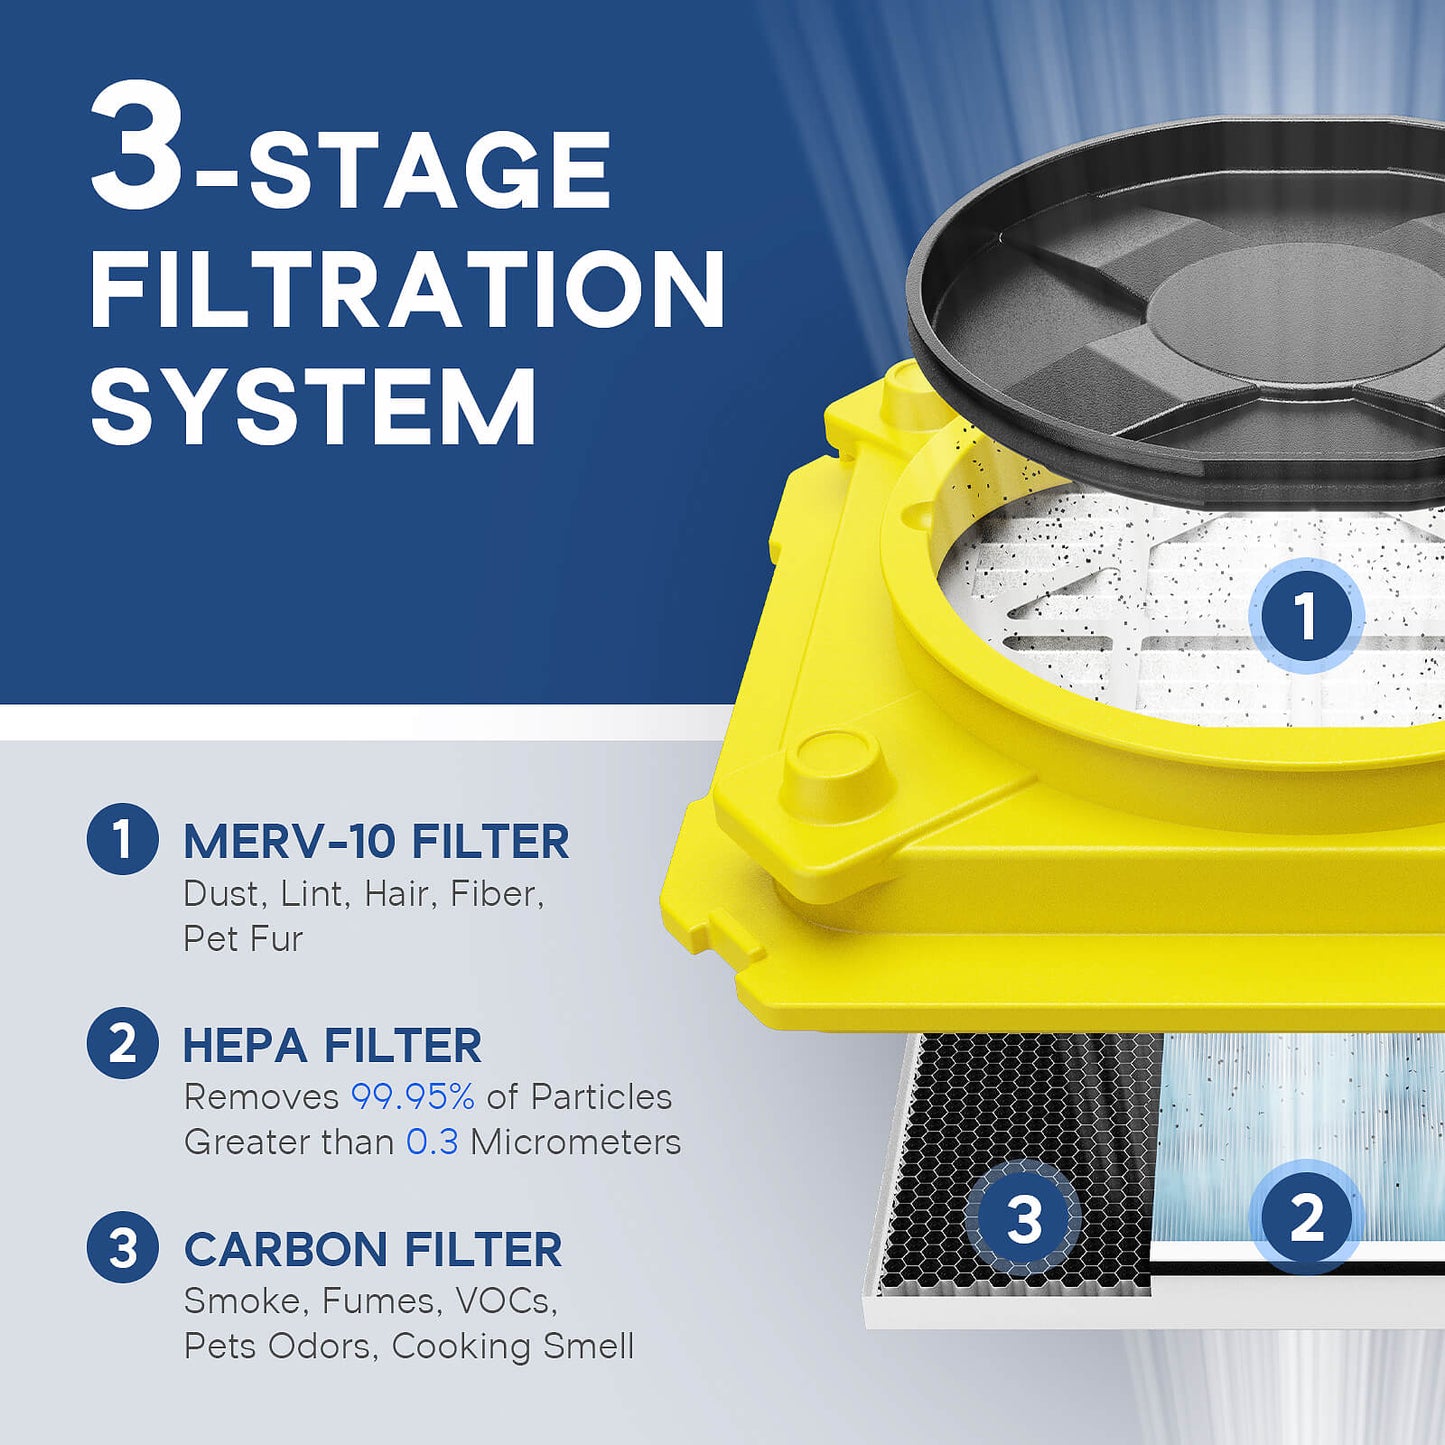 AlorAir Air Scrubber with 3 Stage Filtration, Stackable Negative Air Machine for Industrial and Commercial Use, Air Cleaner with MERV-10 Filter, HEPA/Activated carbon Filter AlorAir